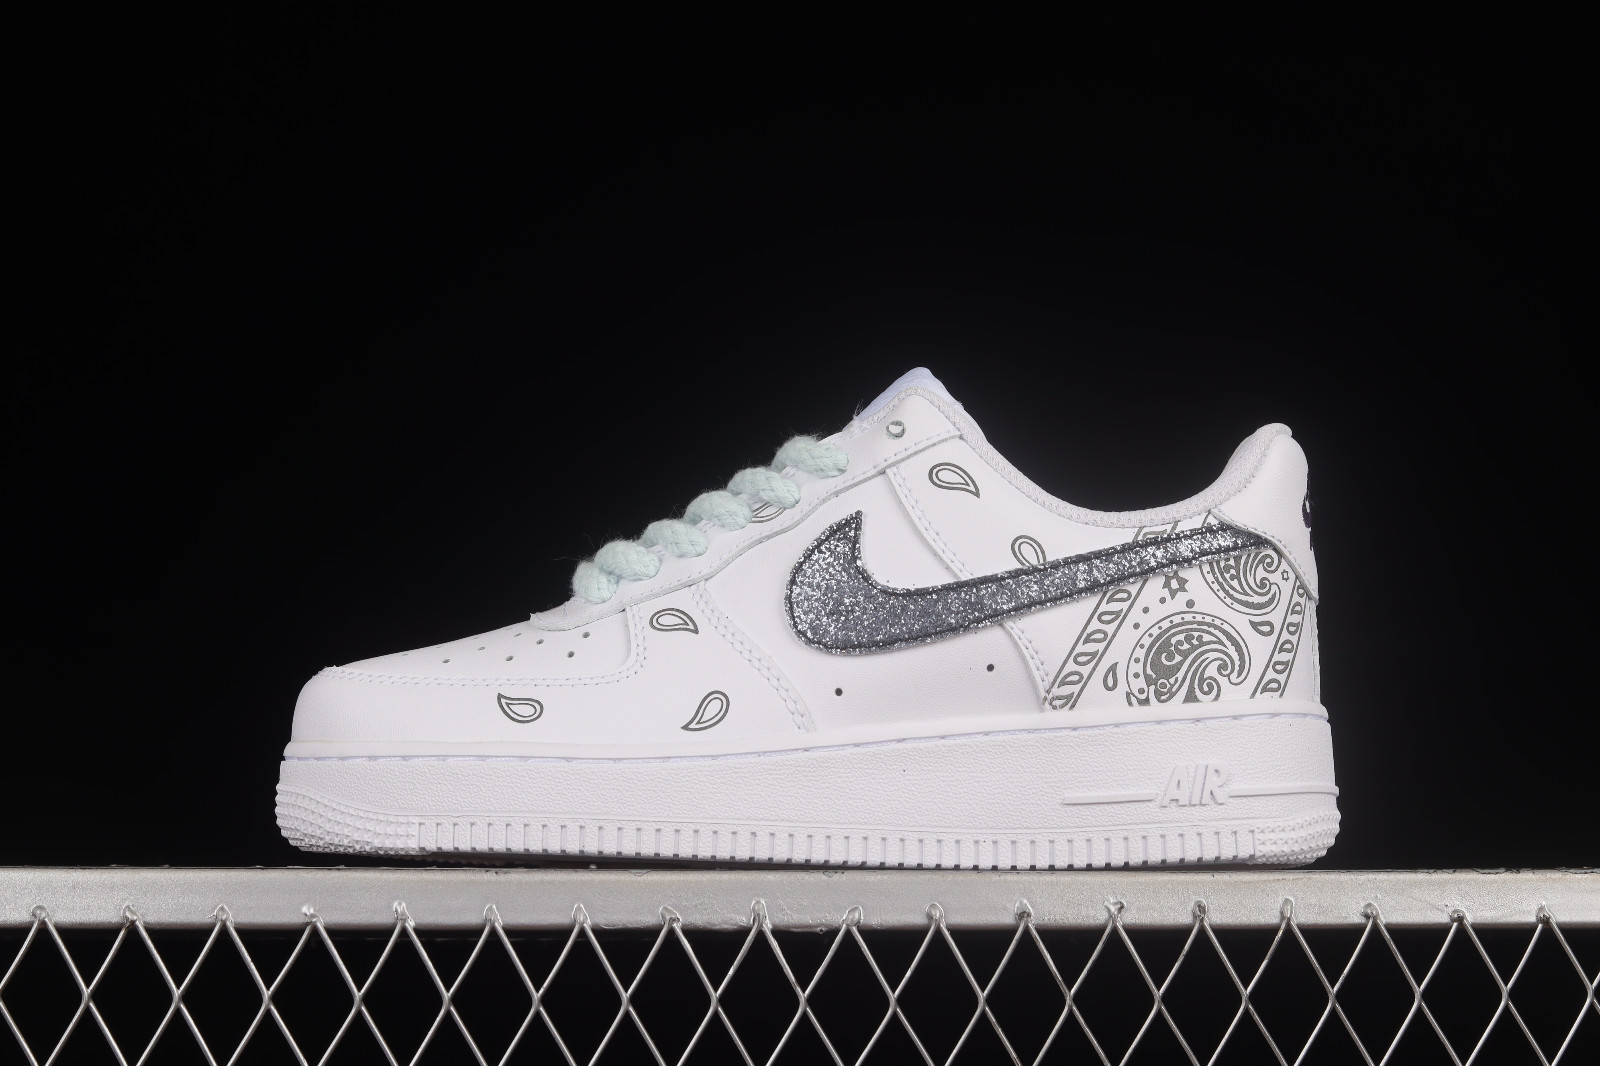 LOUIS VUITTON NIKE AIR FORCE 1 LOW WHITE BLACK NEW SNEAKERS SHOES SIZE 9.5  43 A2 for Sale in Miami, FL - OfferUp